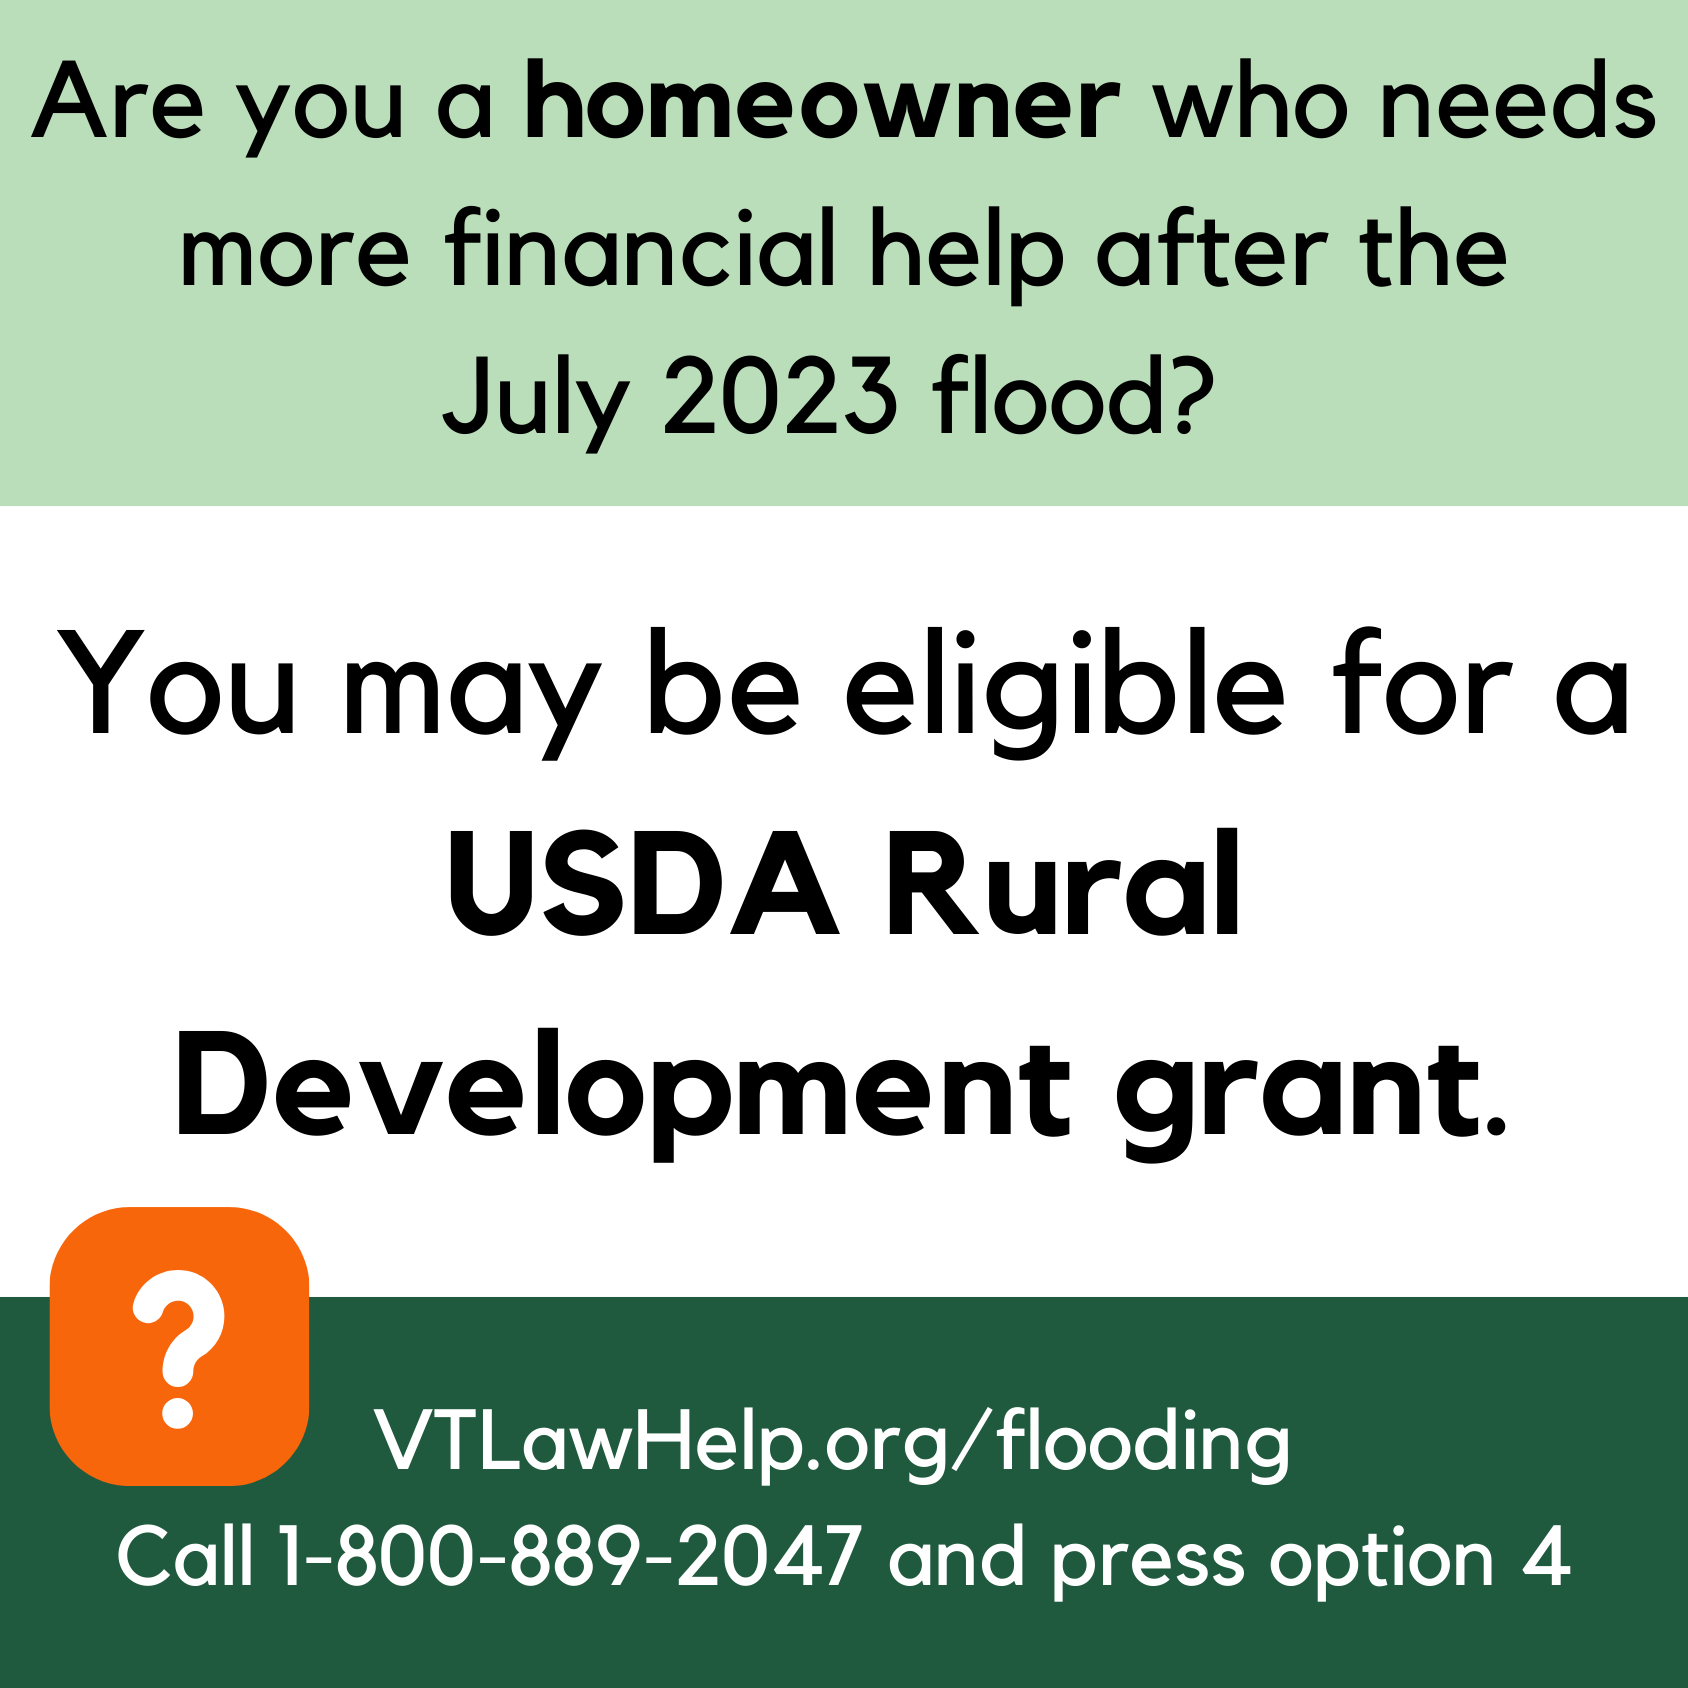 Graphic says to contact us if your are a homeowner who needs more money due to flood damage. Text description follows image.